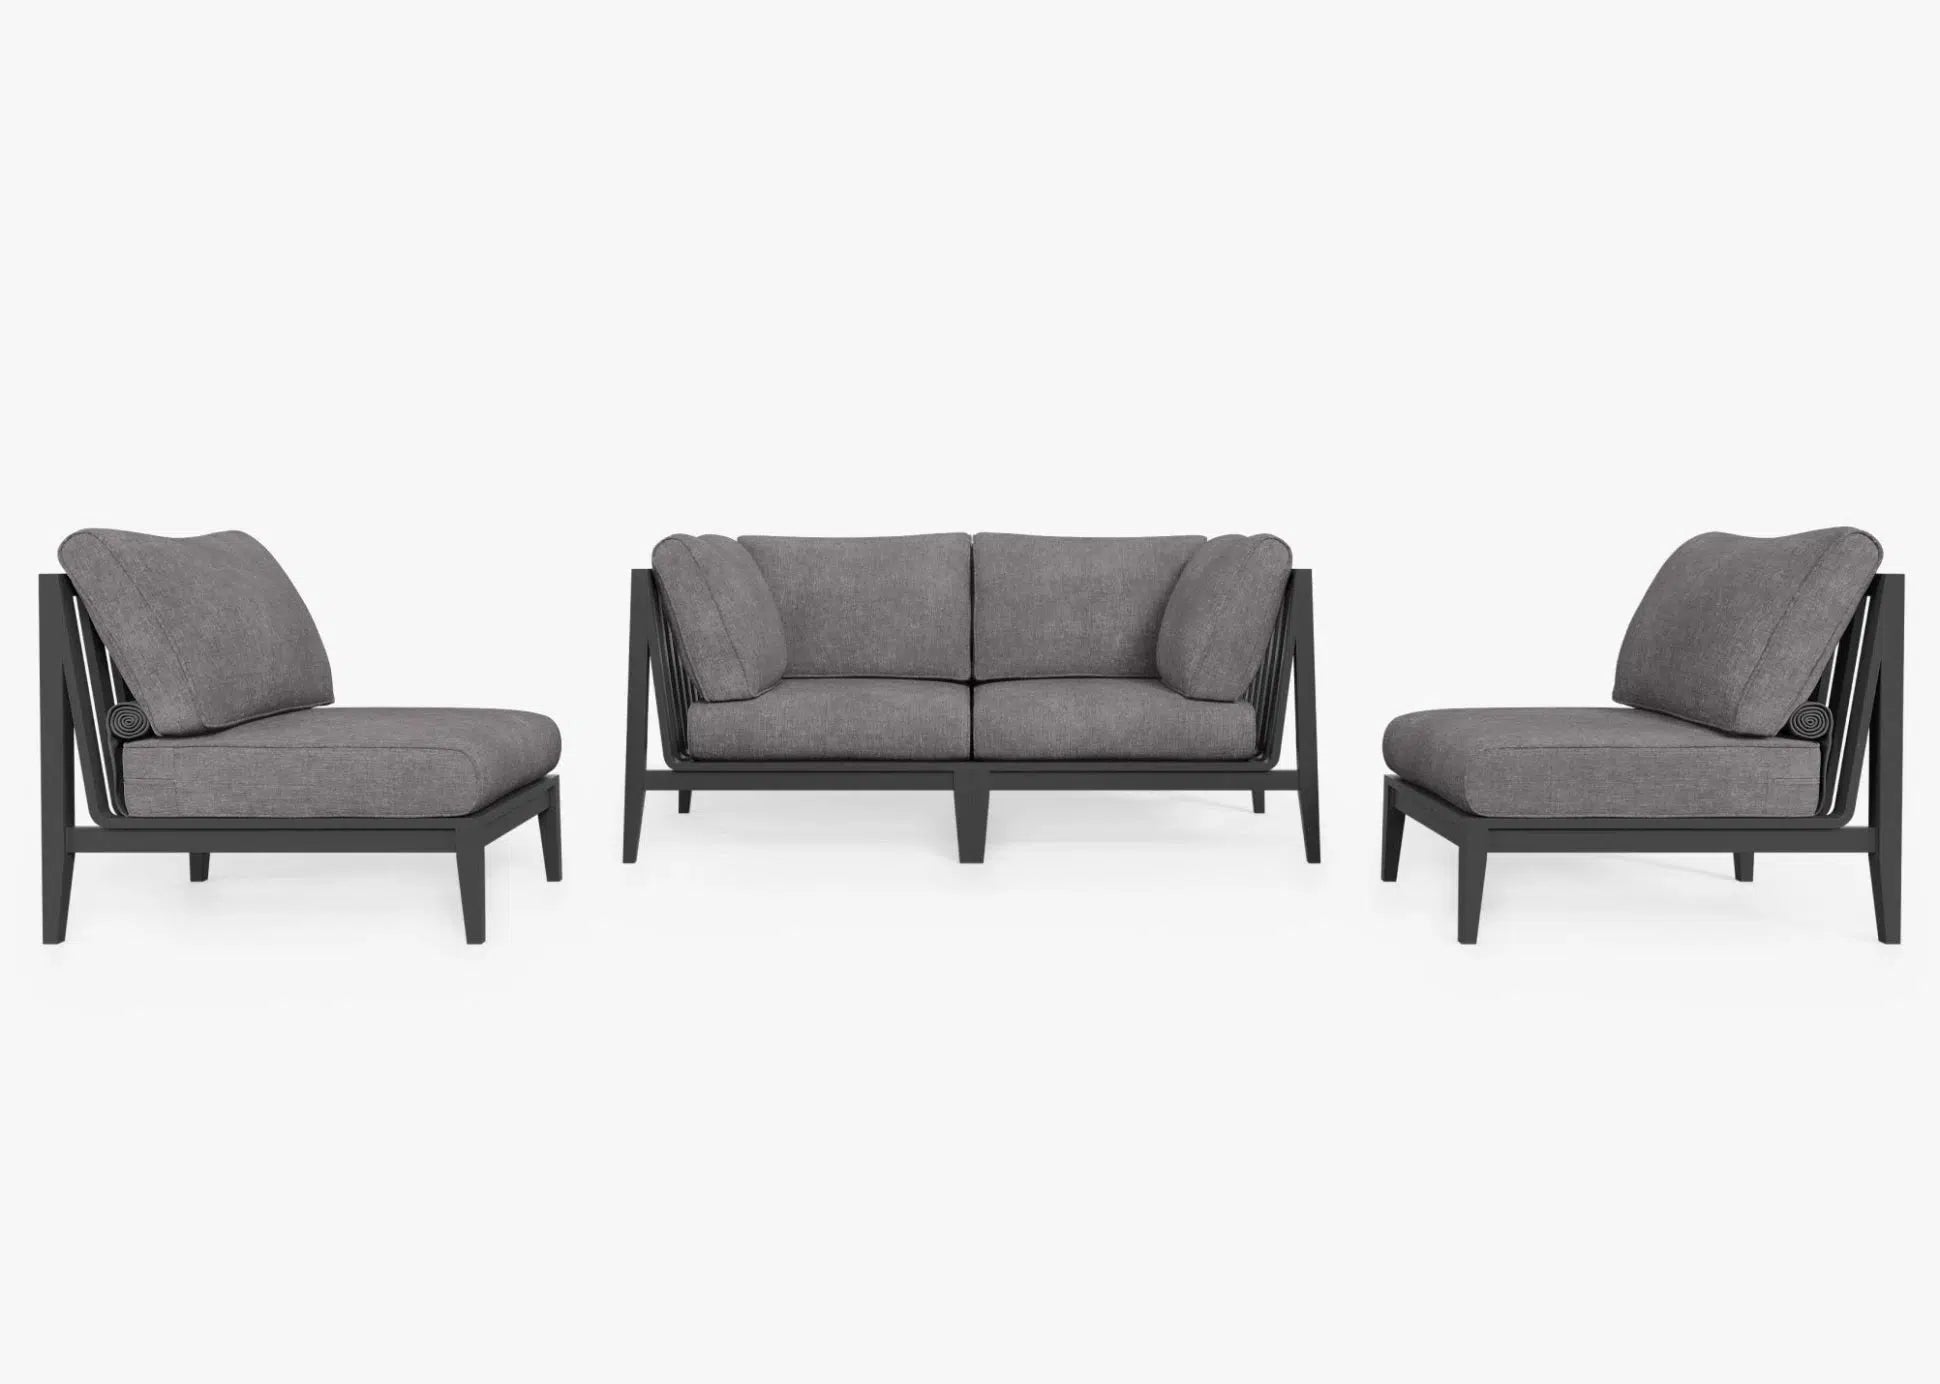 Live Outer 69" Charcoal Aluminum Outdoor Loveseat With Armless Chairs and Dark Pebble Gray Cushion (4-Seat)